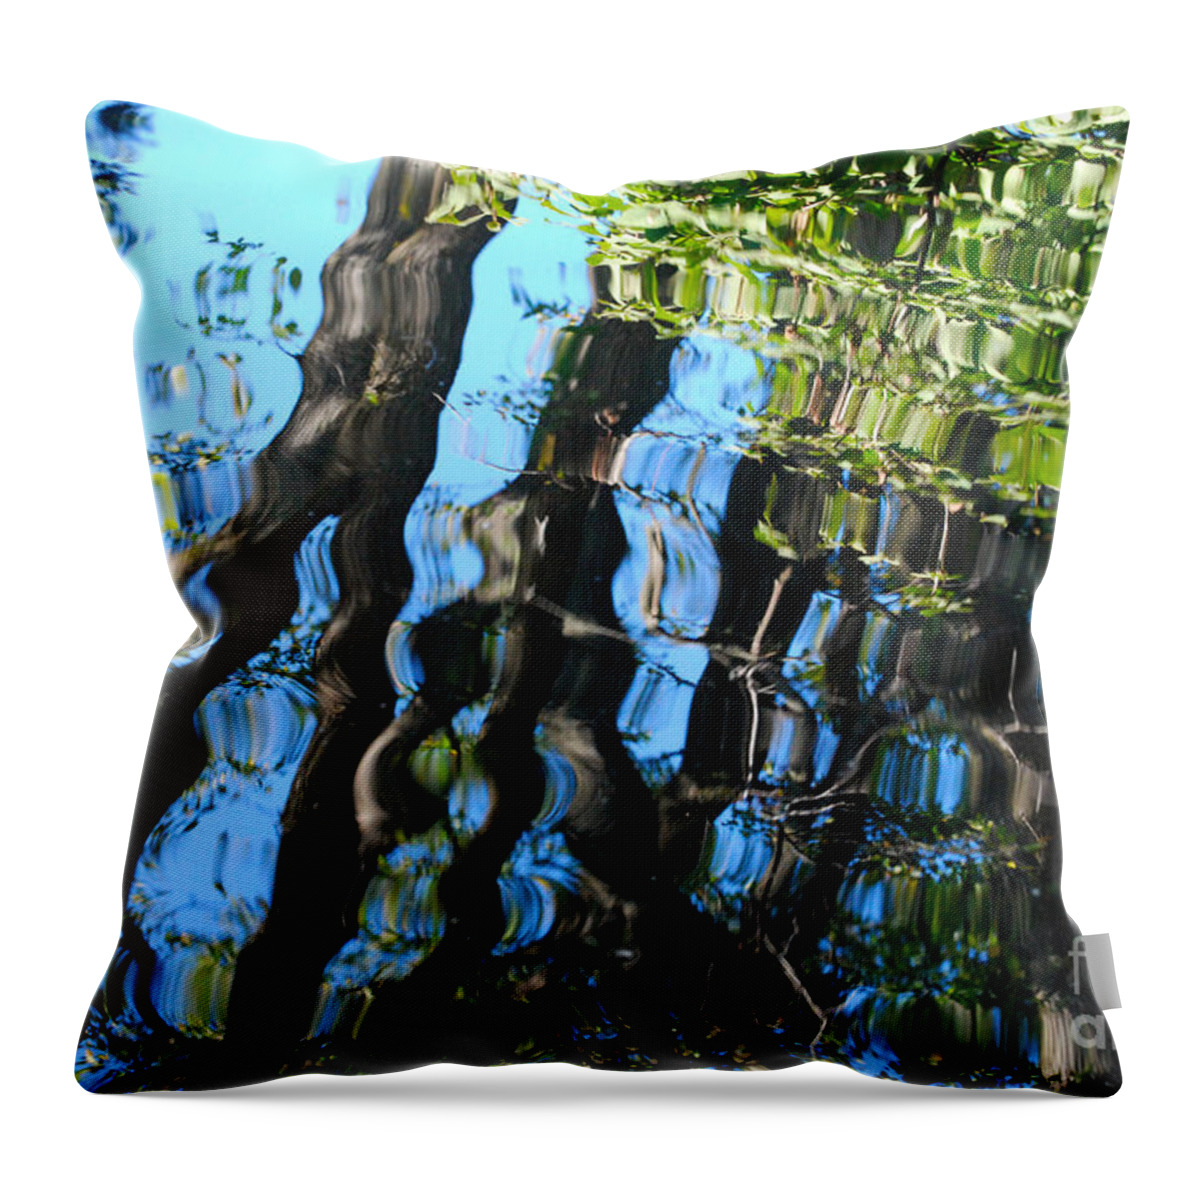 Pond Throw Pillow featuring the photograph Water Reflections 2 by Nancy Mueller